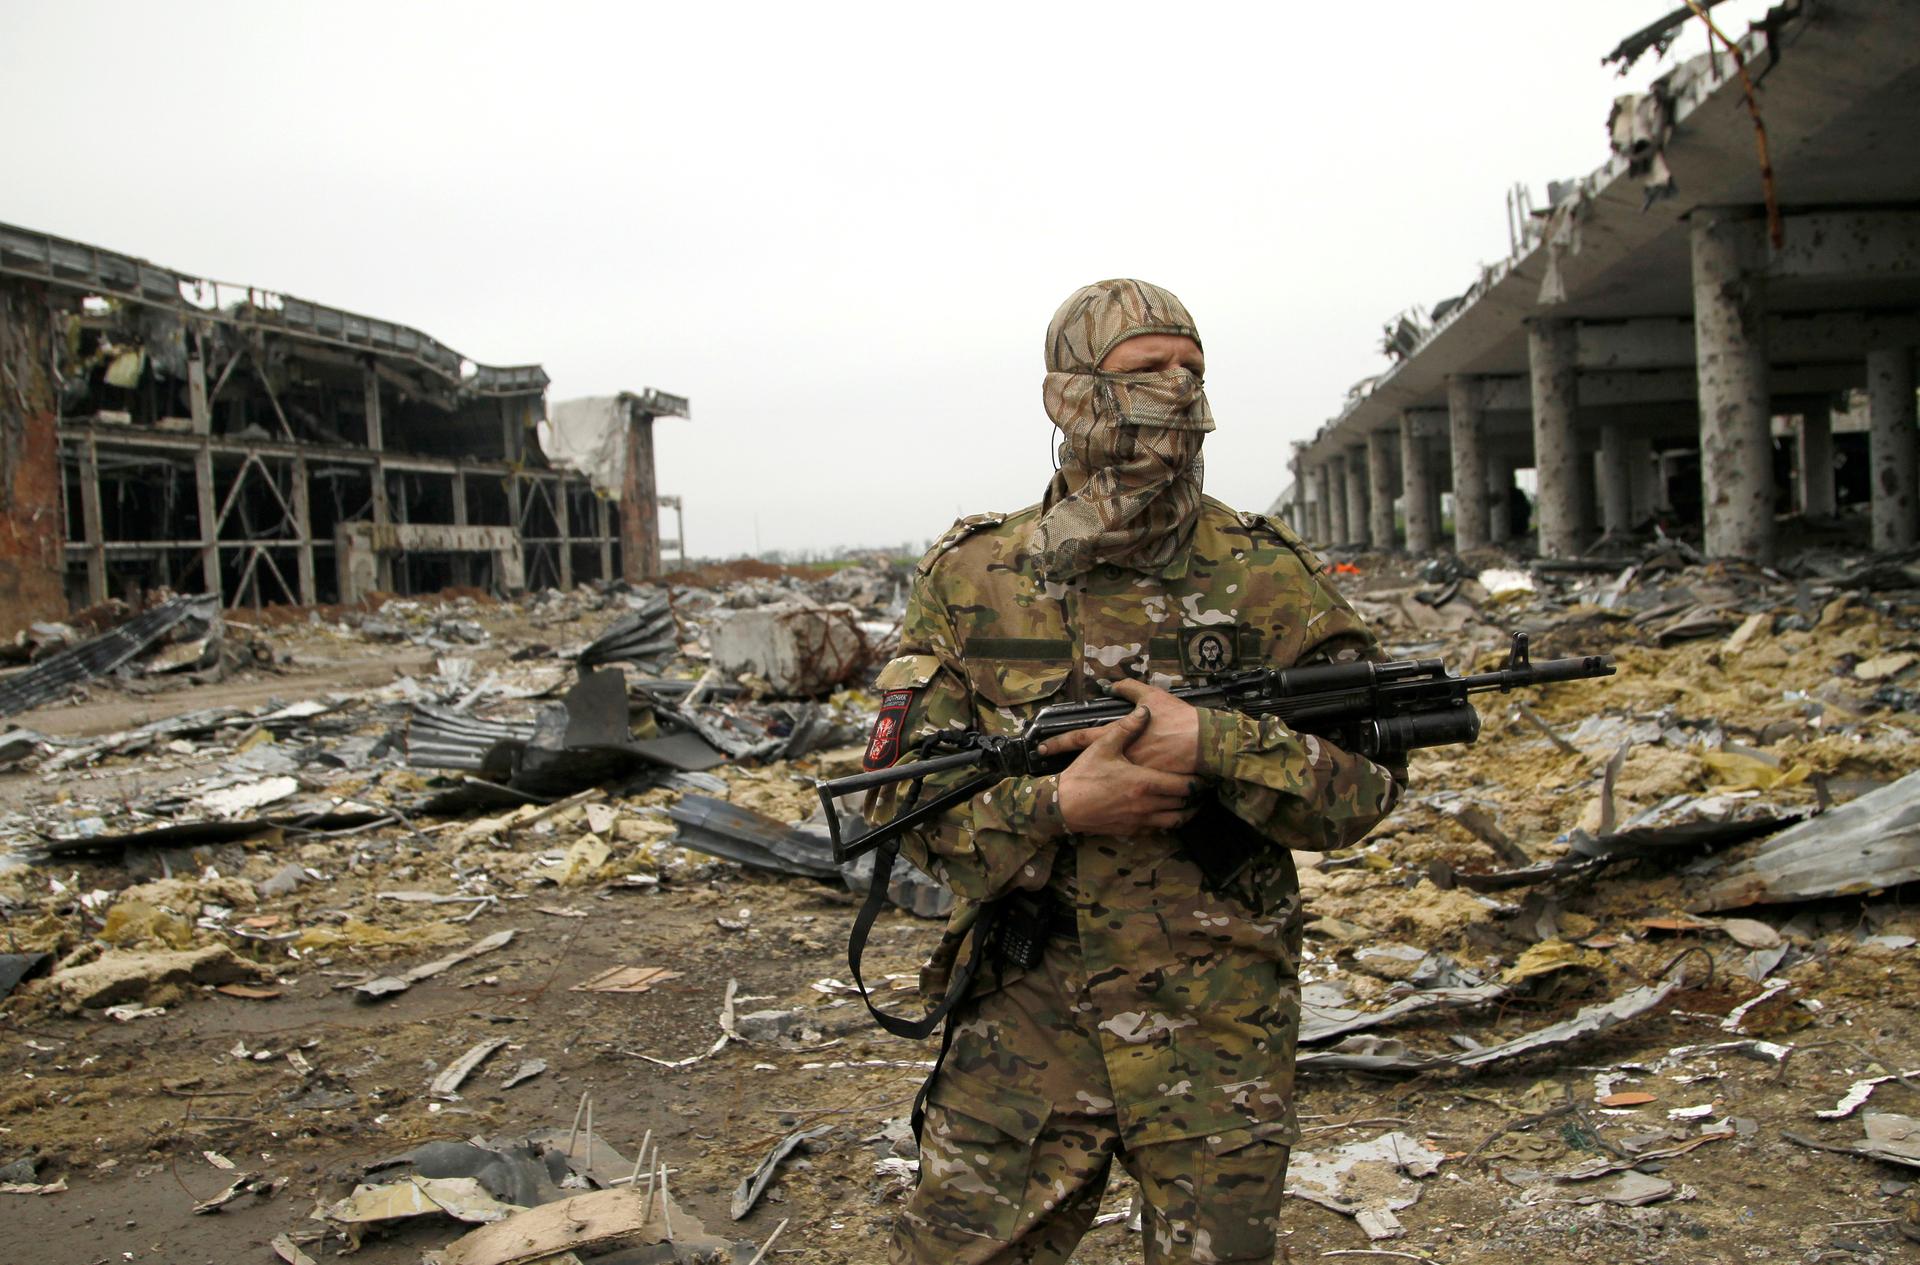 A pro-Russian rebel soldier stands guard near buildings destroyed during battles with Ukrainian armed forces, at Donetsk airport, Ukraine, June 1st 2016.